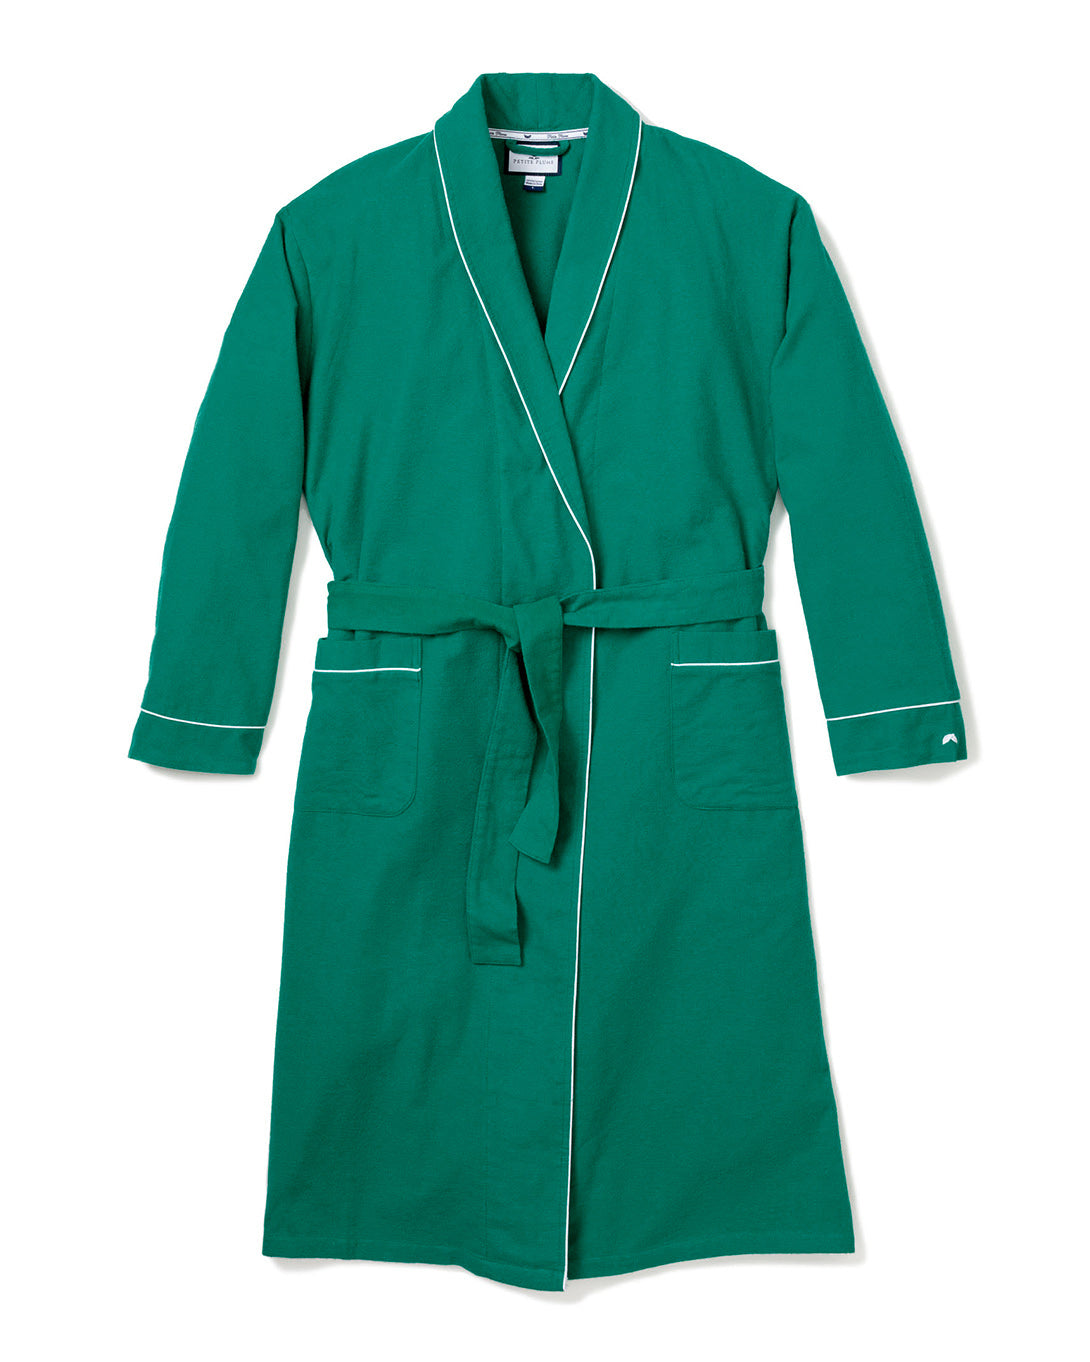 Men's Flannel Robe in Forest Green with White Piping